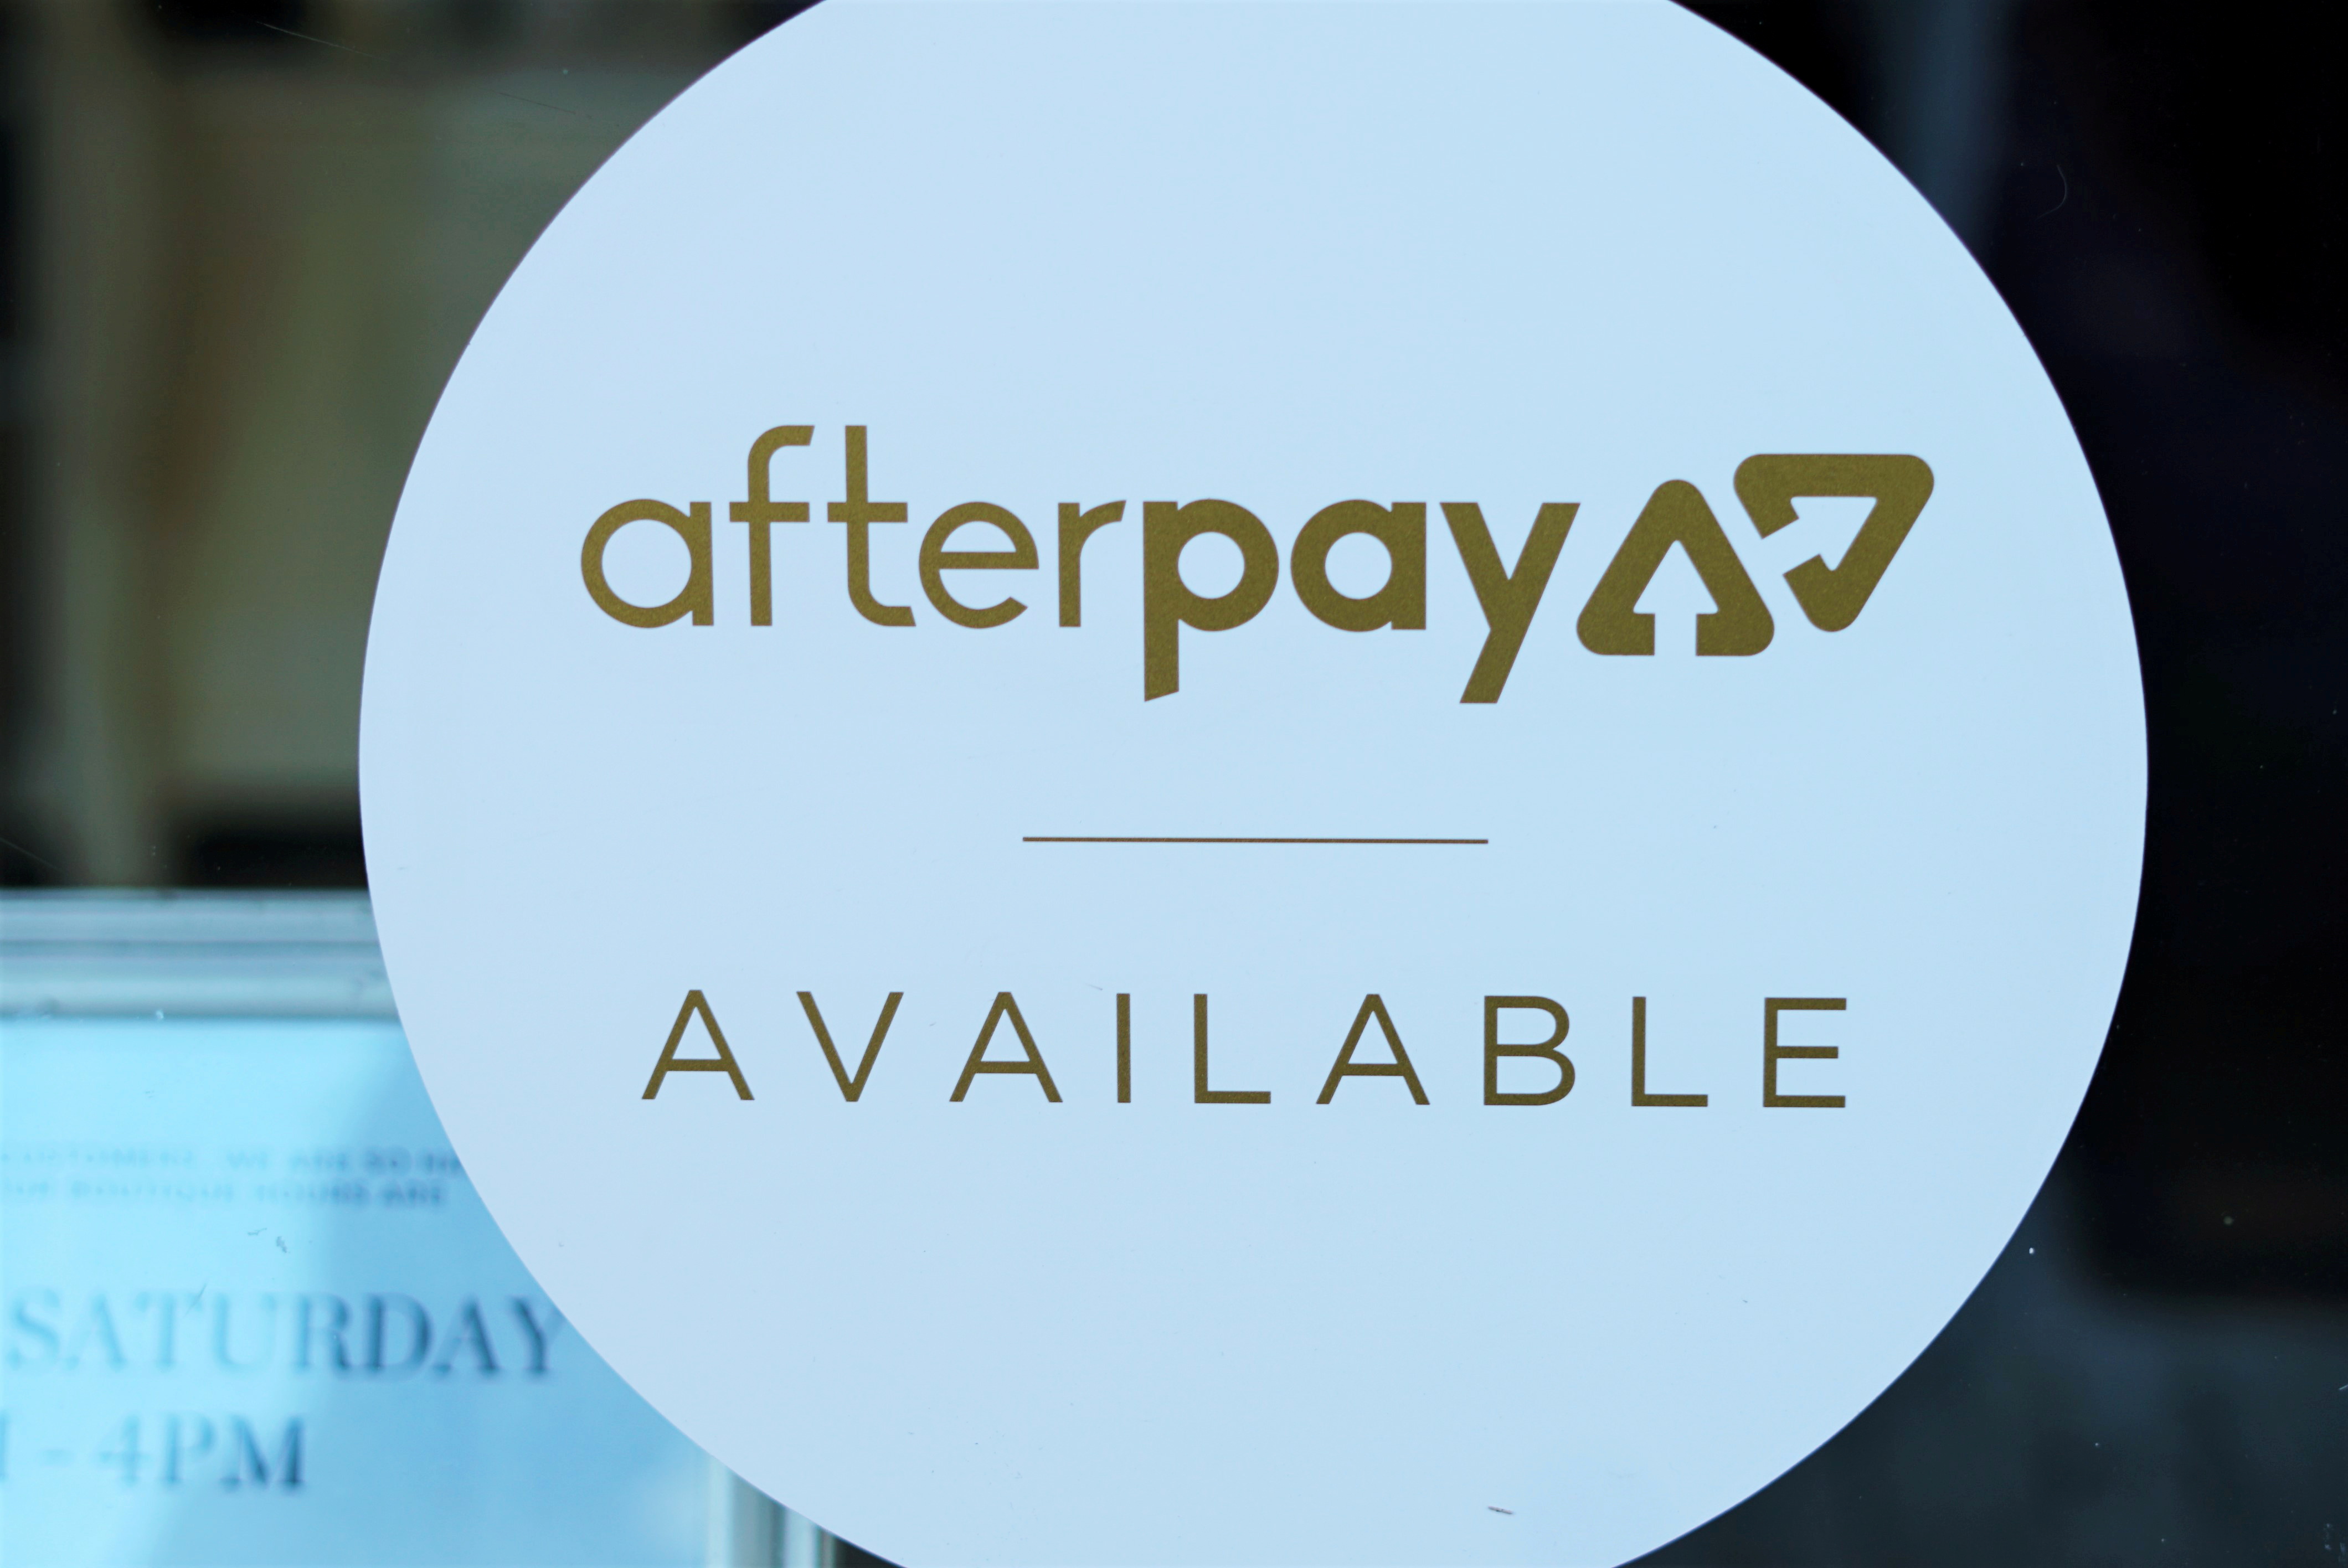 WOO HOO! We are now offering afterpay! Afterpay makes your